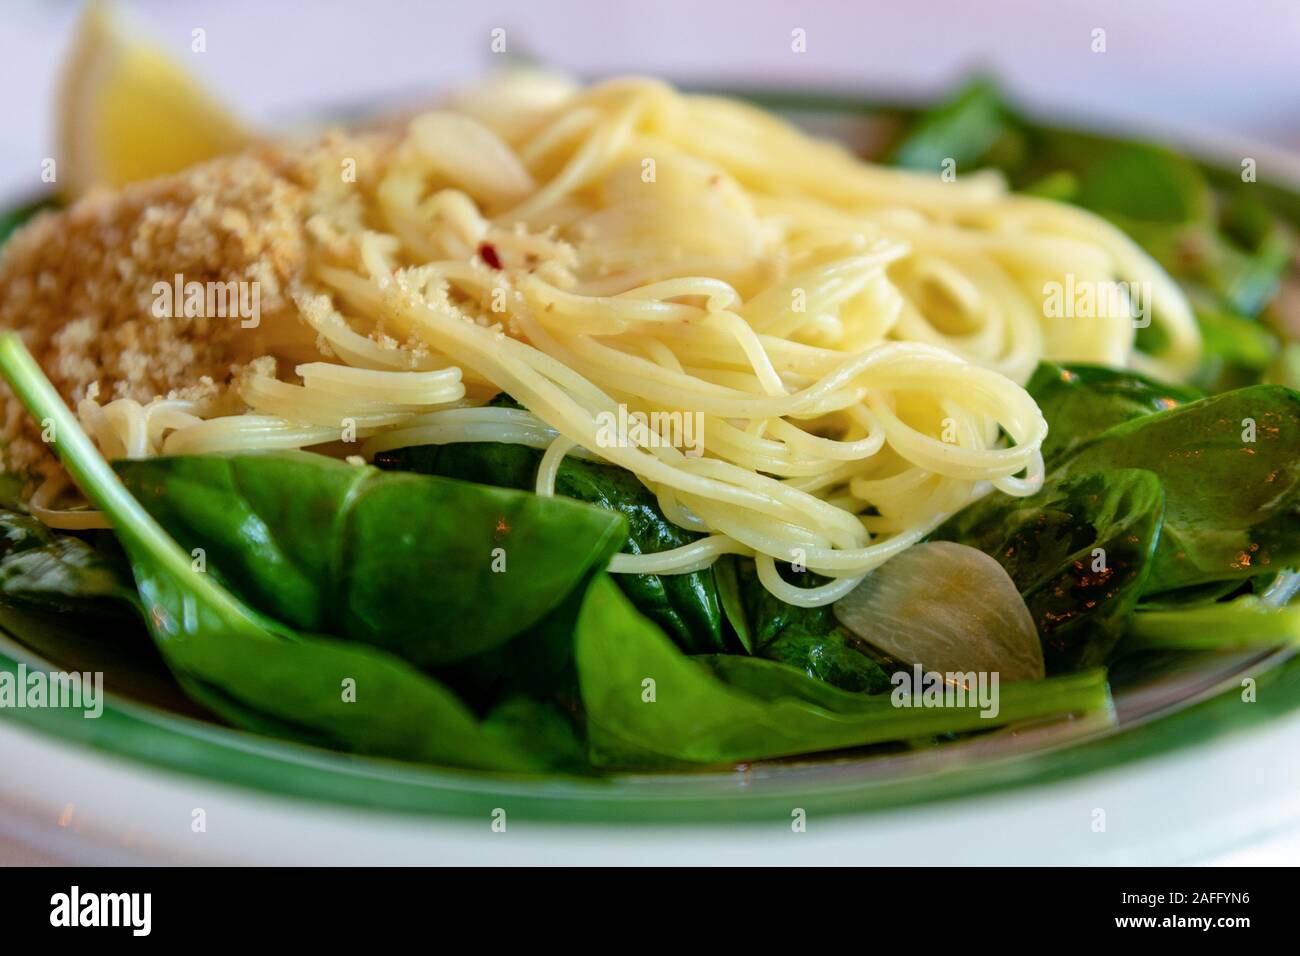 https://c8.alamy.com/comp/2AFFYN6/close-up-on-capellini-angel-hair-pasta-with-virgin-olive-oil-spinach-fresh-lemon-chili-flakes-garlic-and-toasted-bread-crumbs-side-view-2AFFYN6.jpg